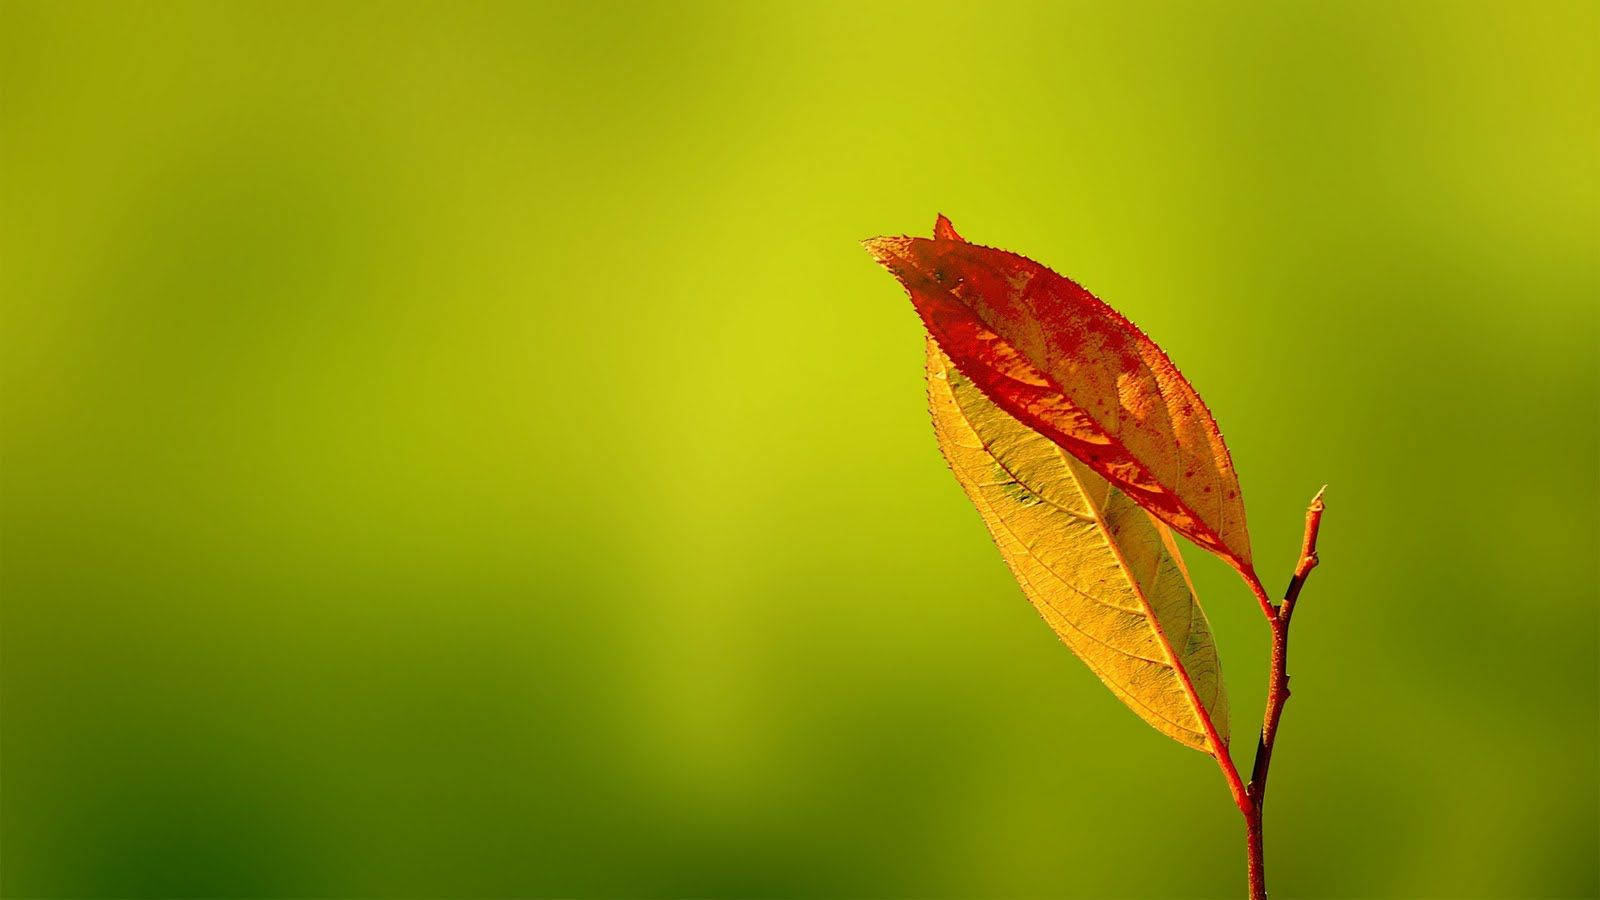 Enjoy The Beautiful Vibrancy Of This Orange And Yellow Leaf!